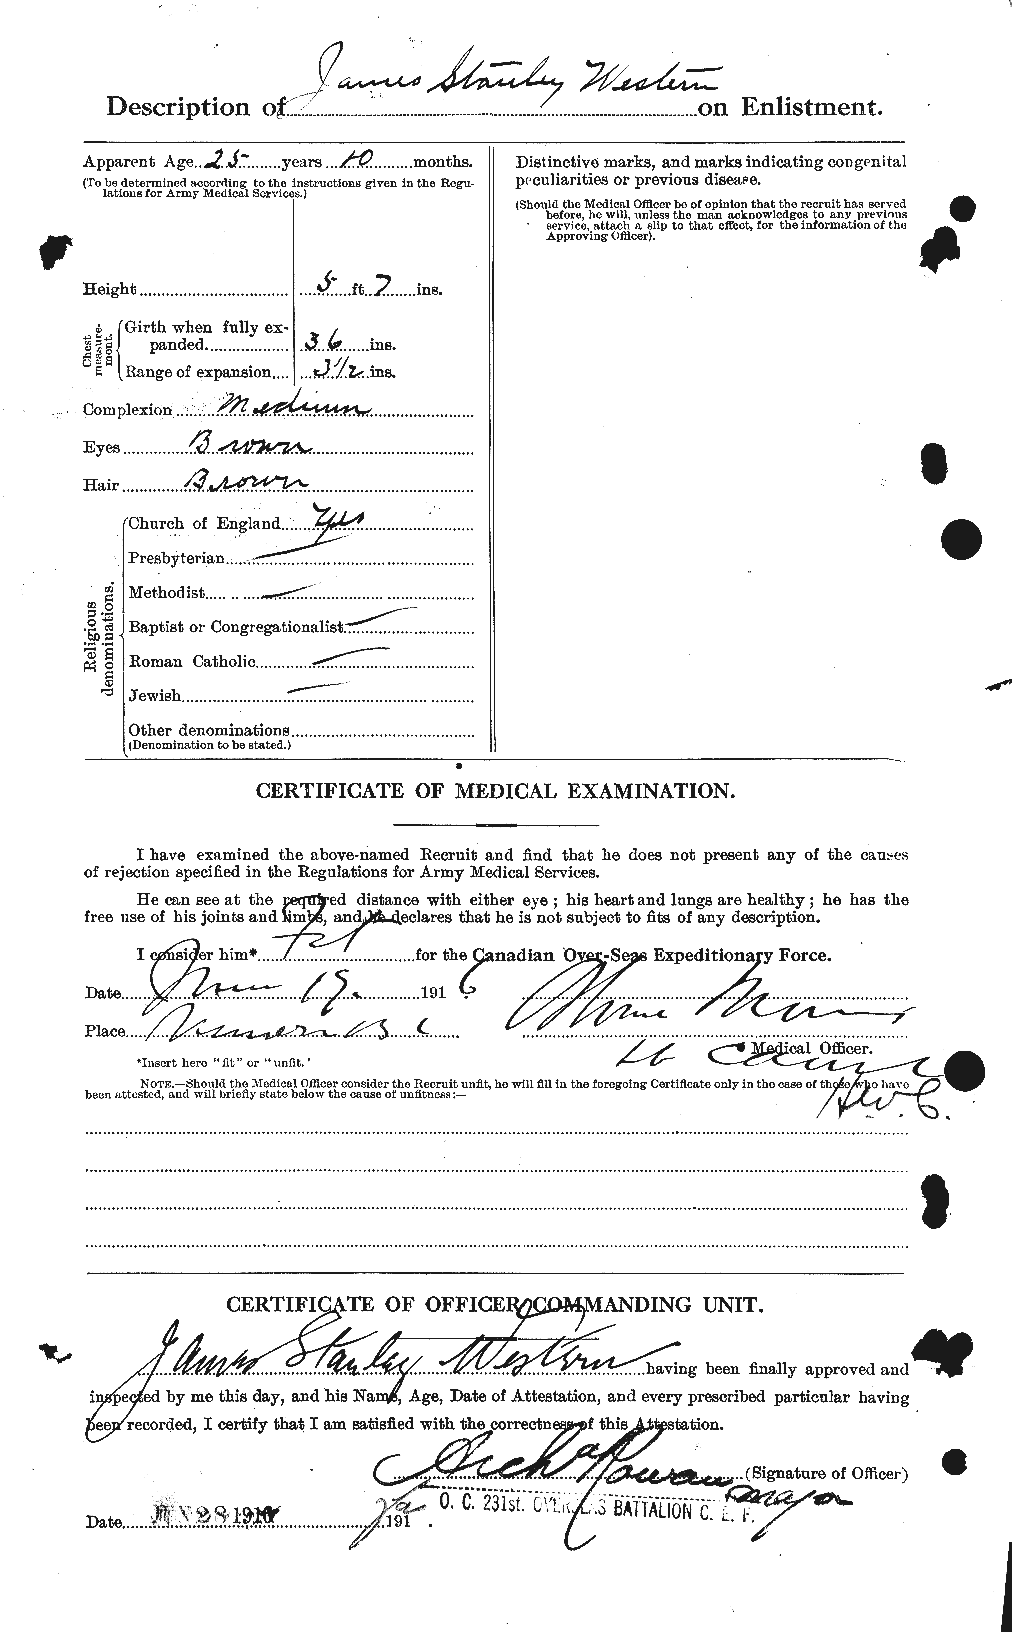 Personnel Records of the First World War - CEF 668171b